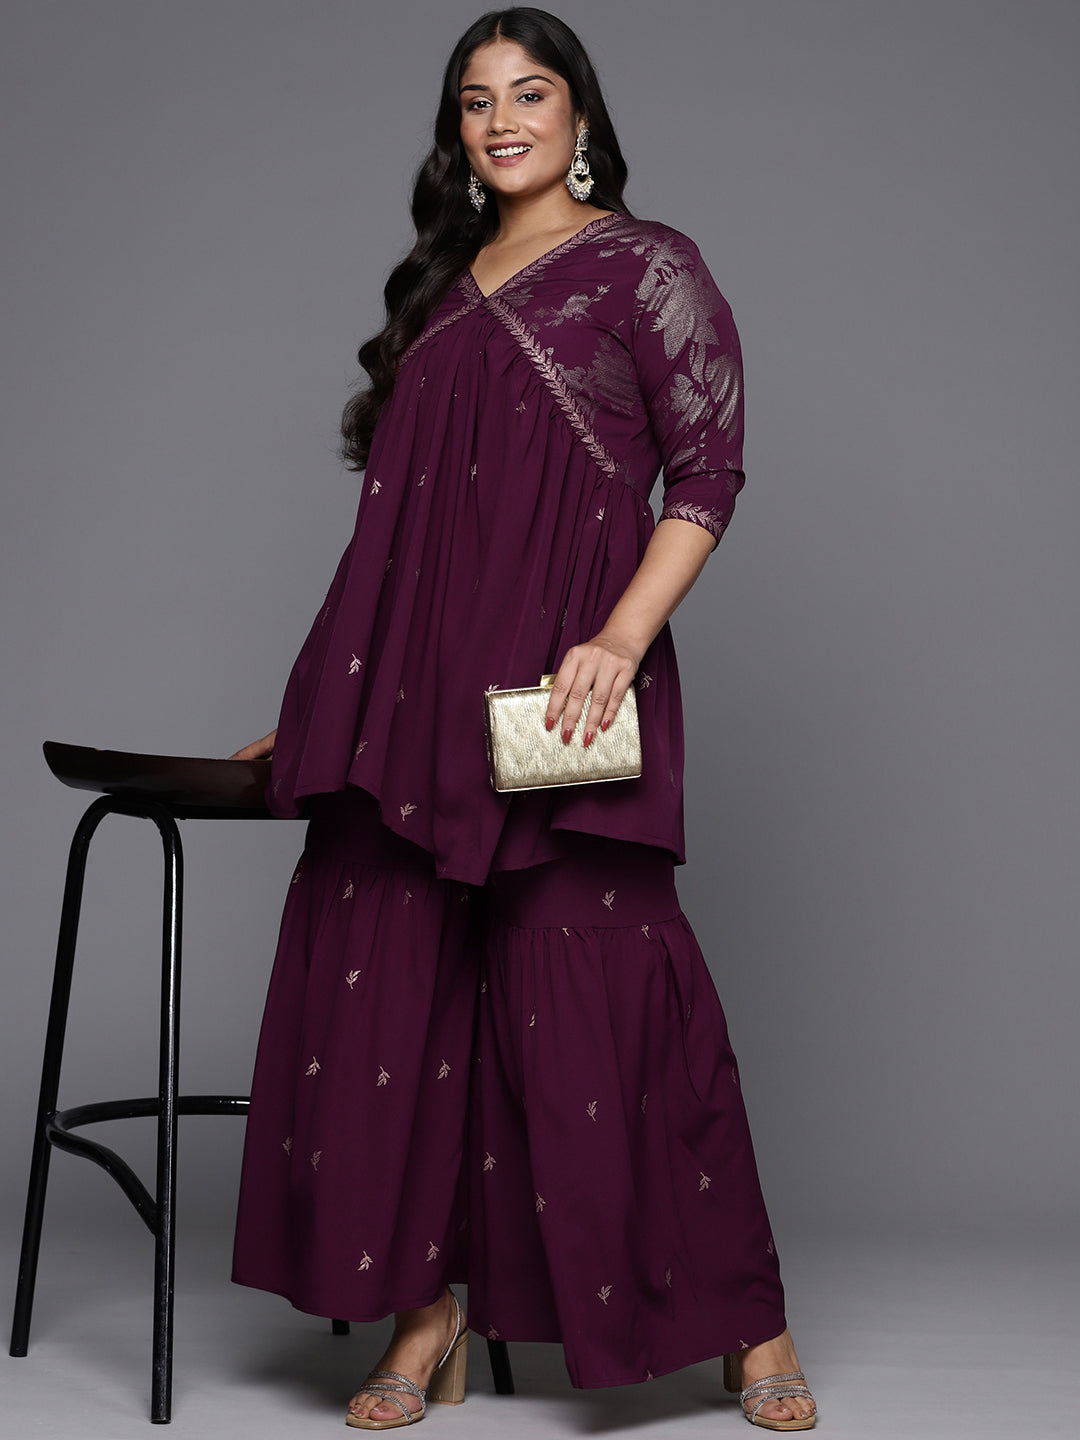 A PLUS BY AHALYAA Plus Size Floral Printed Empire Kurti with Sharara